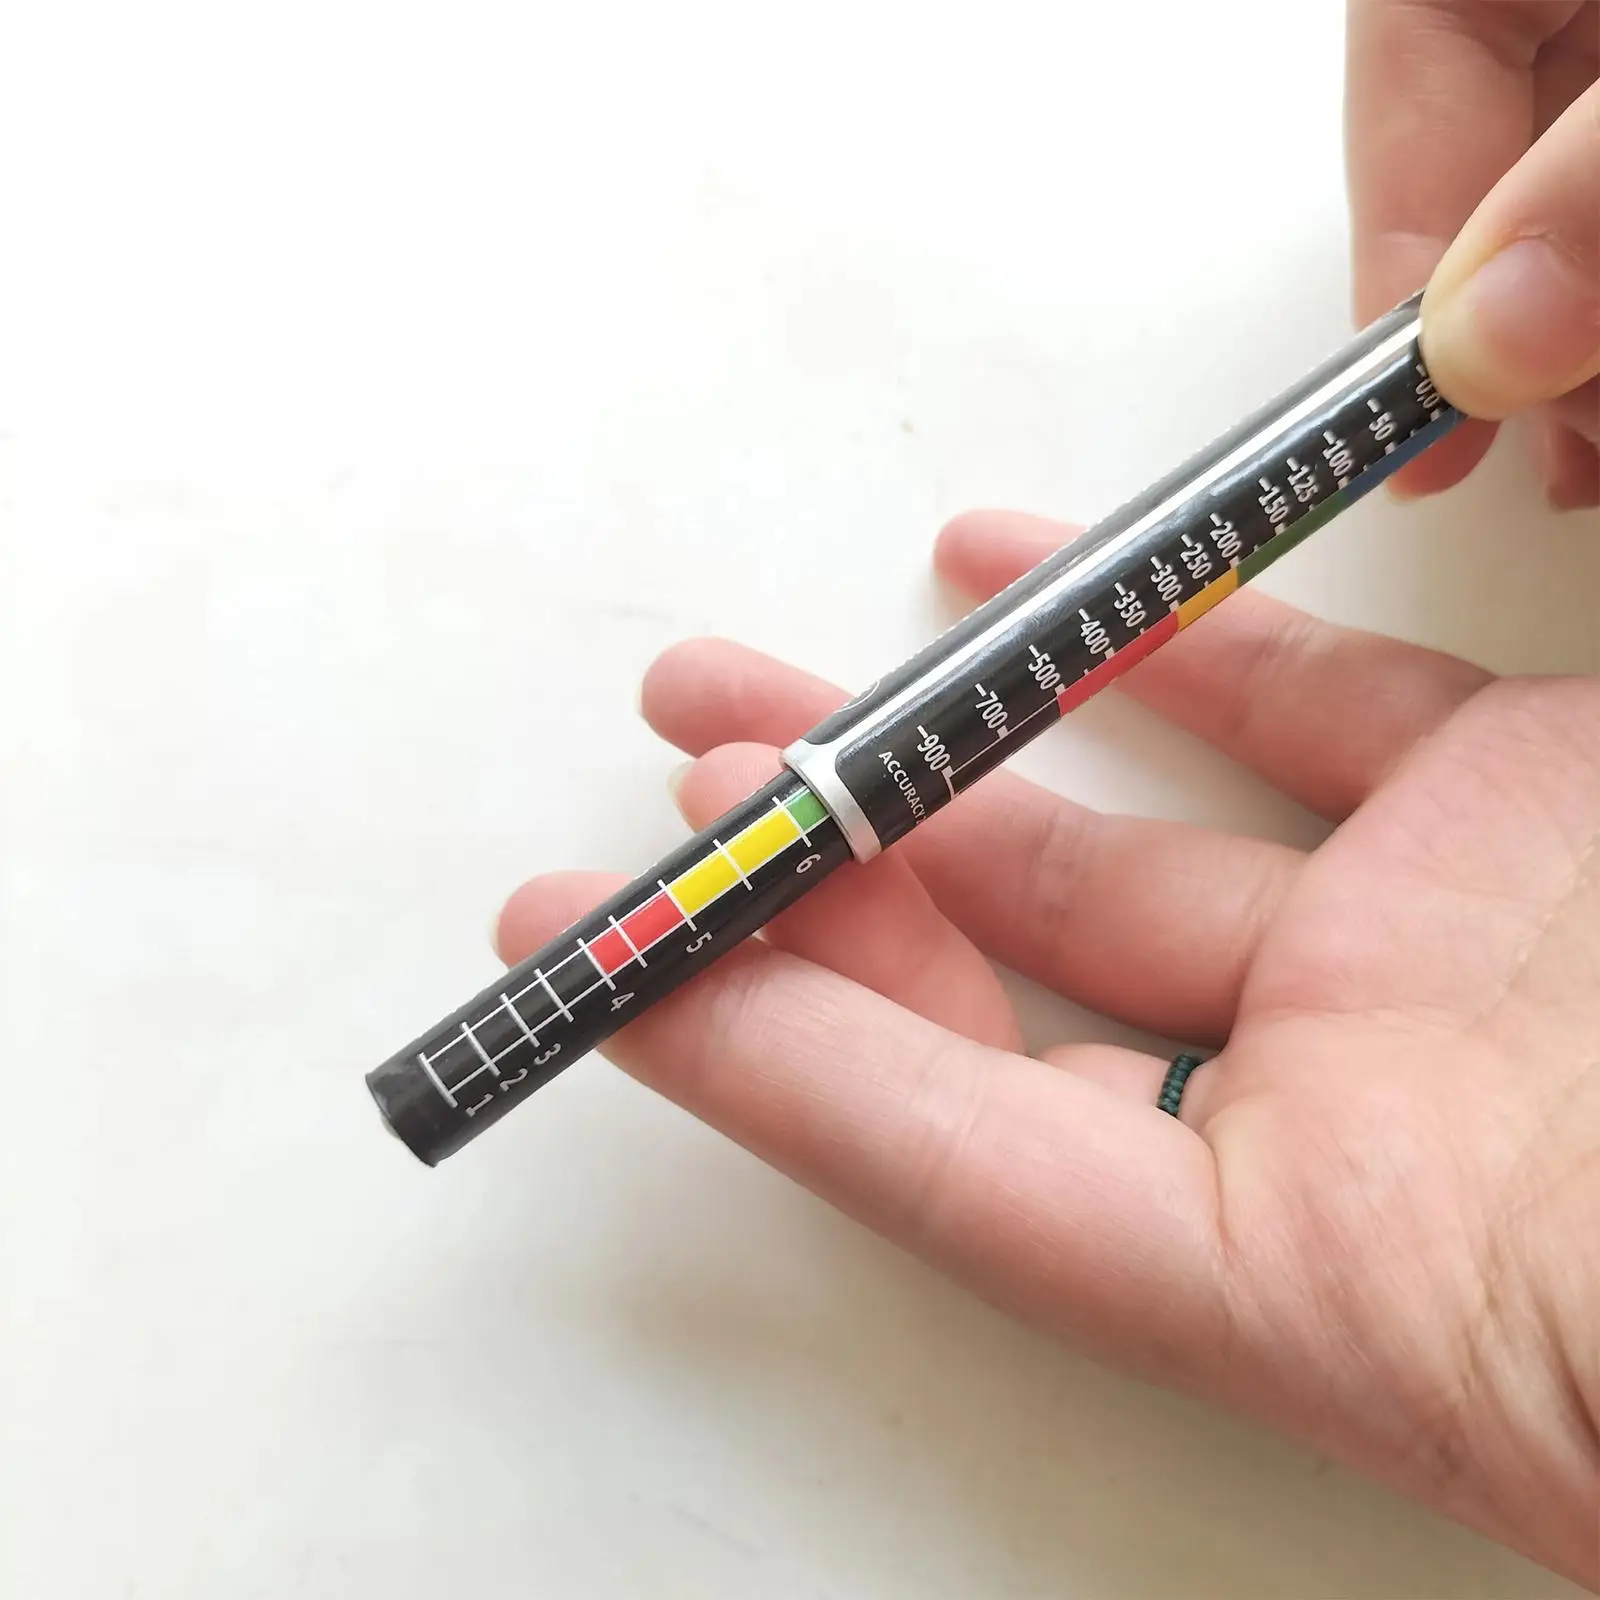 Pen Shaped Paint Thickness Gauge Crash Test Checking Water Resistant Meter